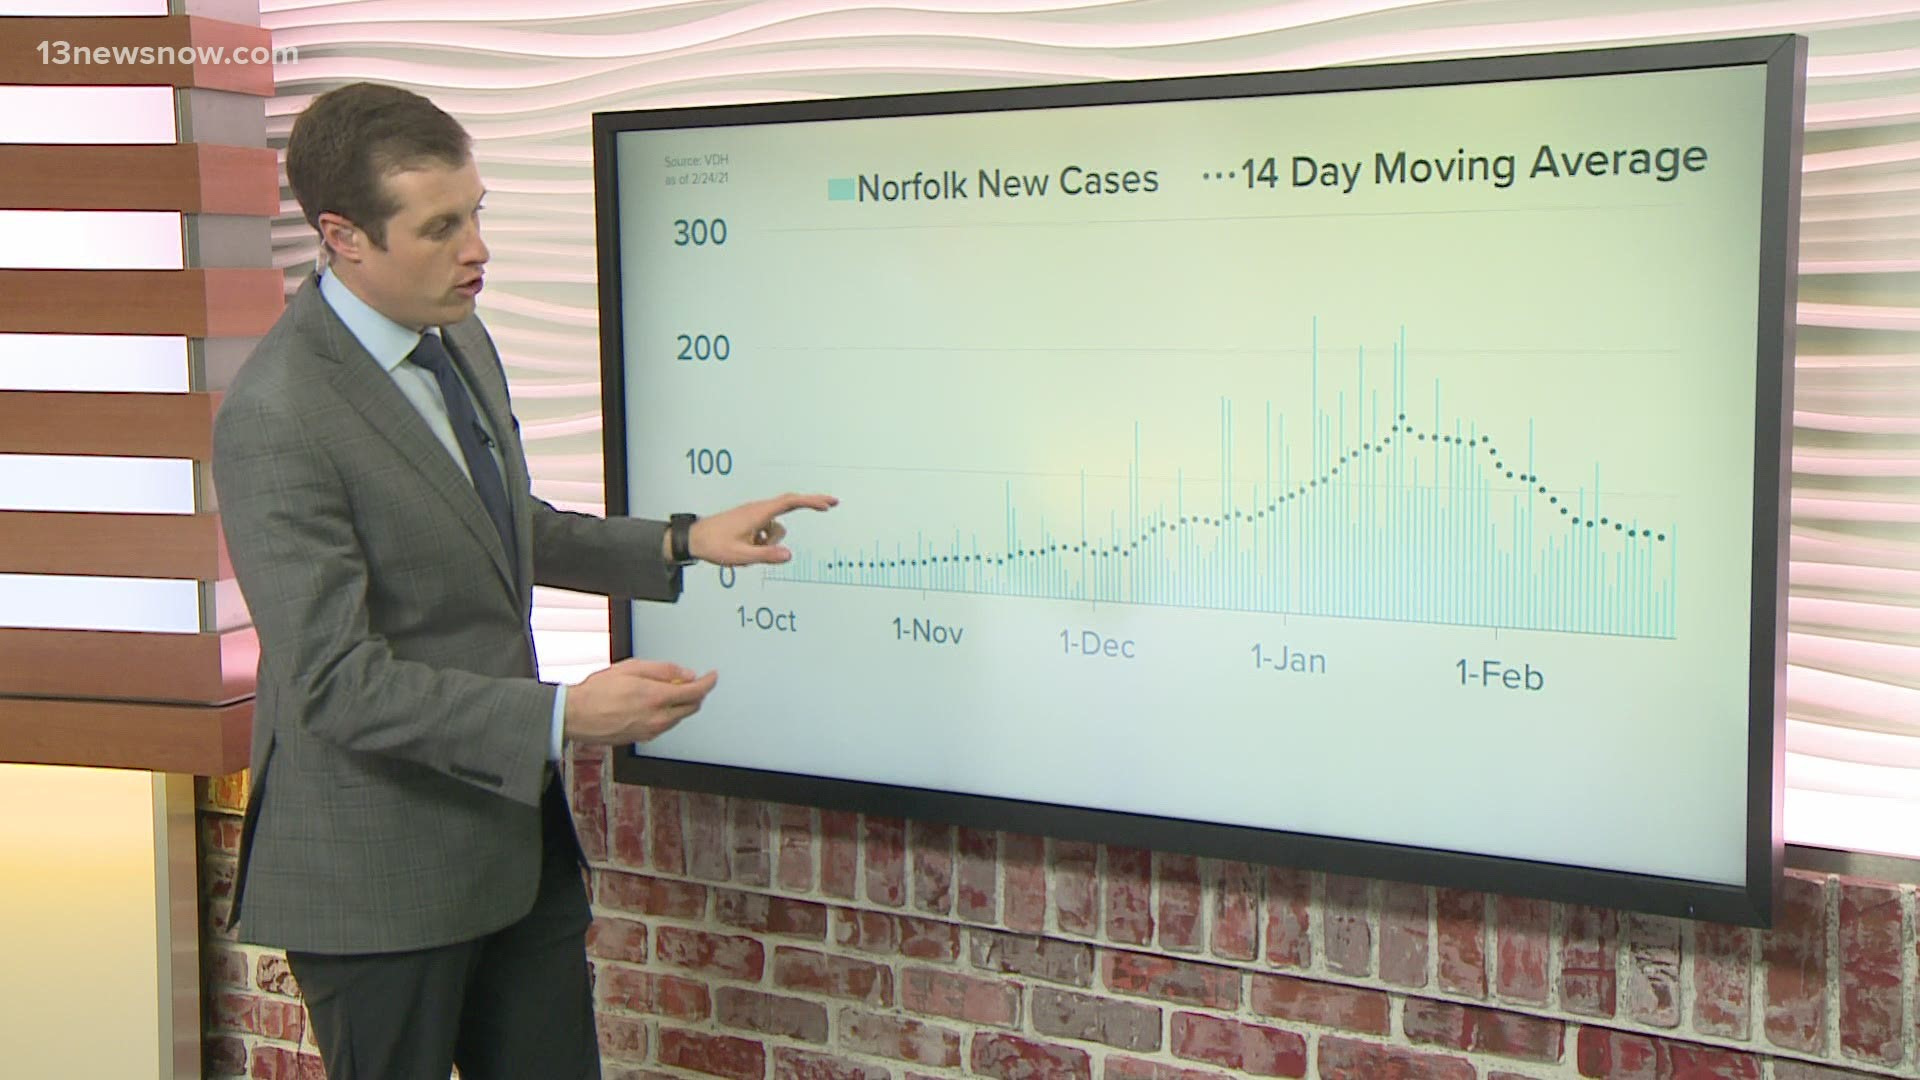 13News Now Dan Kennedy has the latest breakdown of COVID-19 case counts and metrics in Hampton Roads and Virginia as of February 24, 2021.